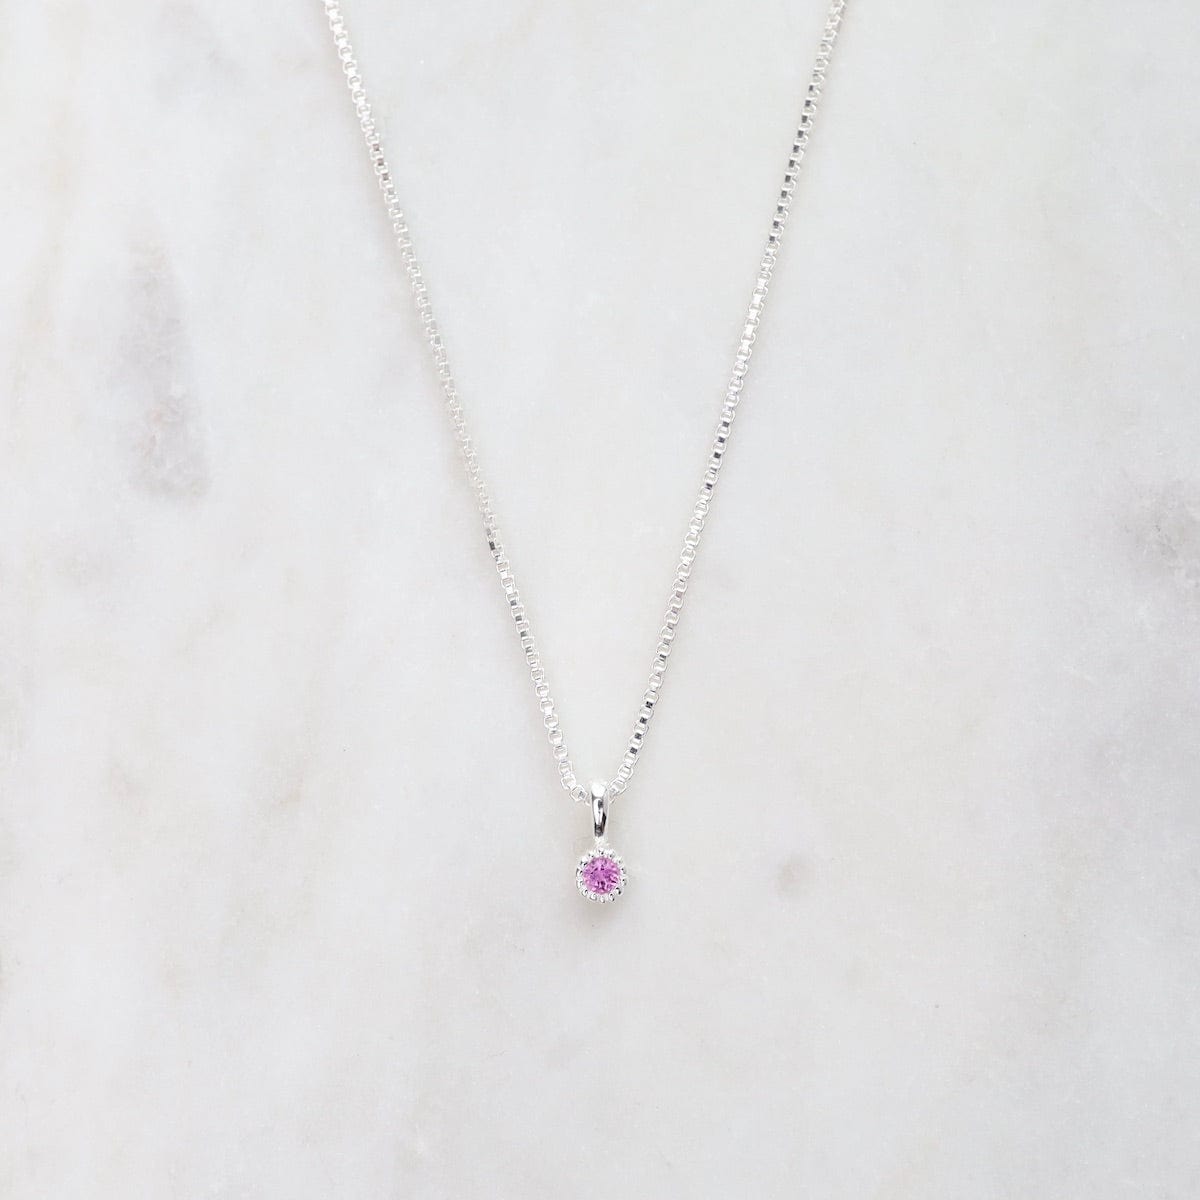 nkl pink sapphire with milgrain edge necklace sterling silver 41074612535527